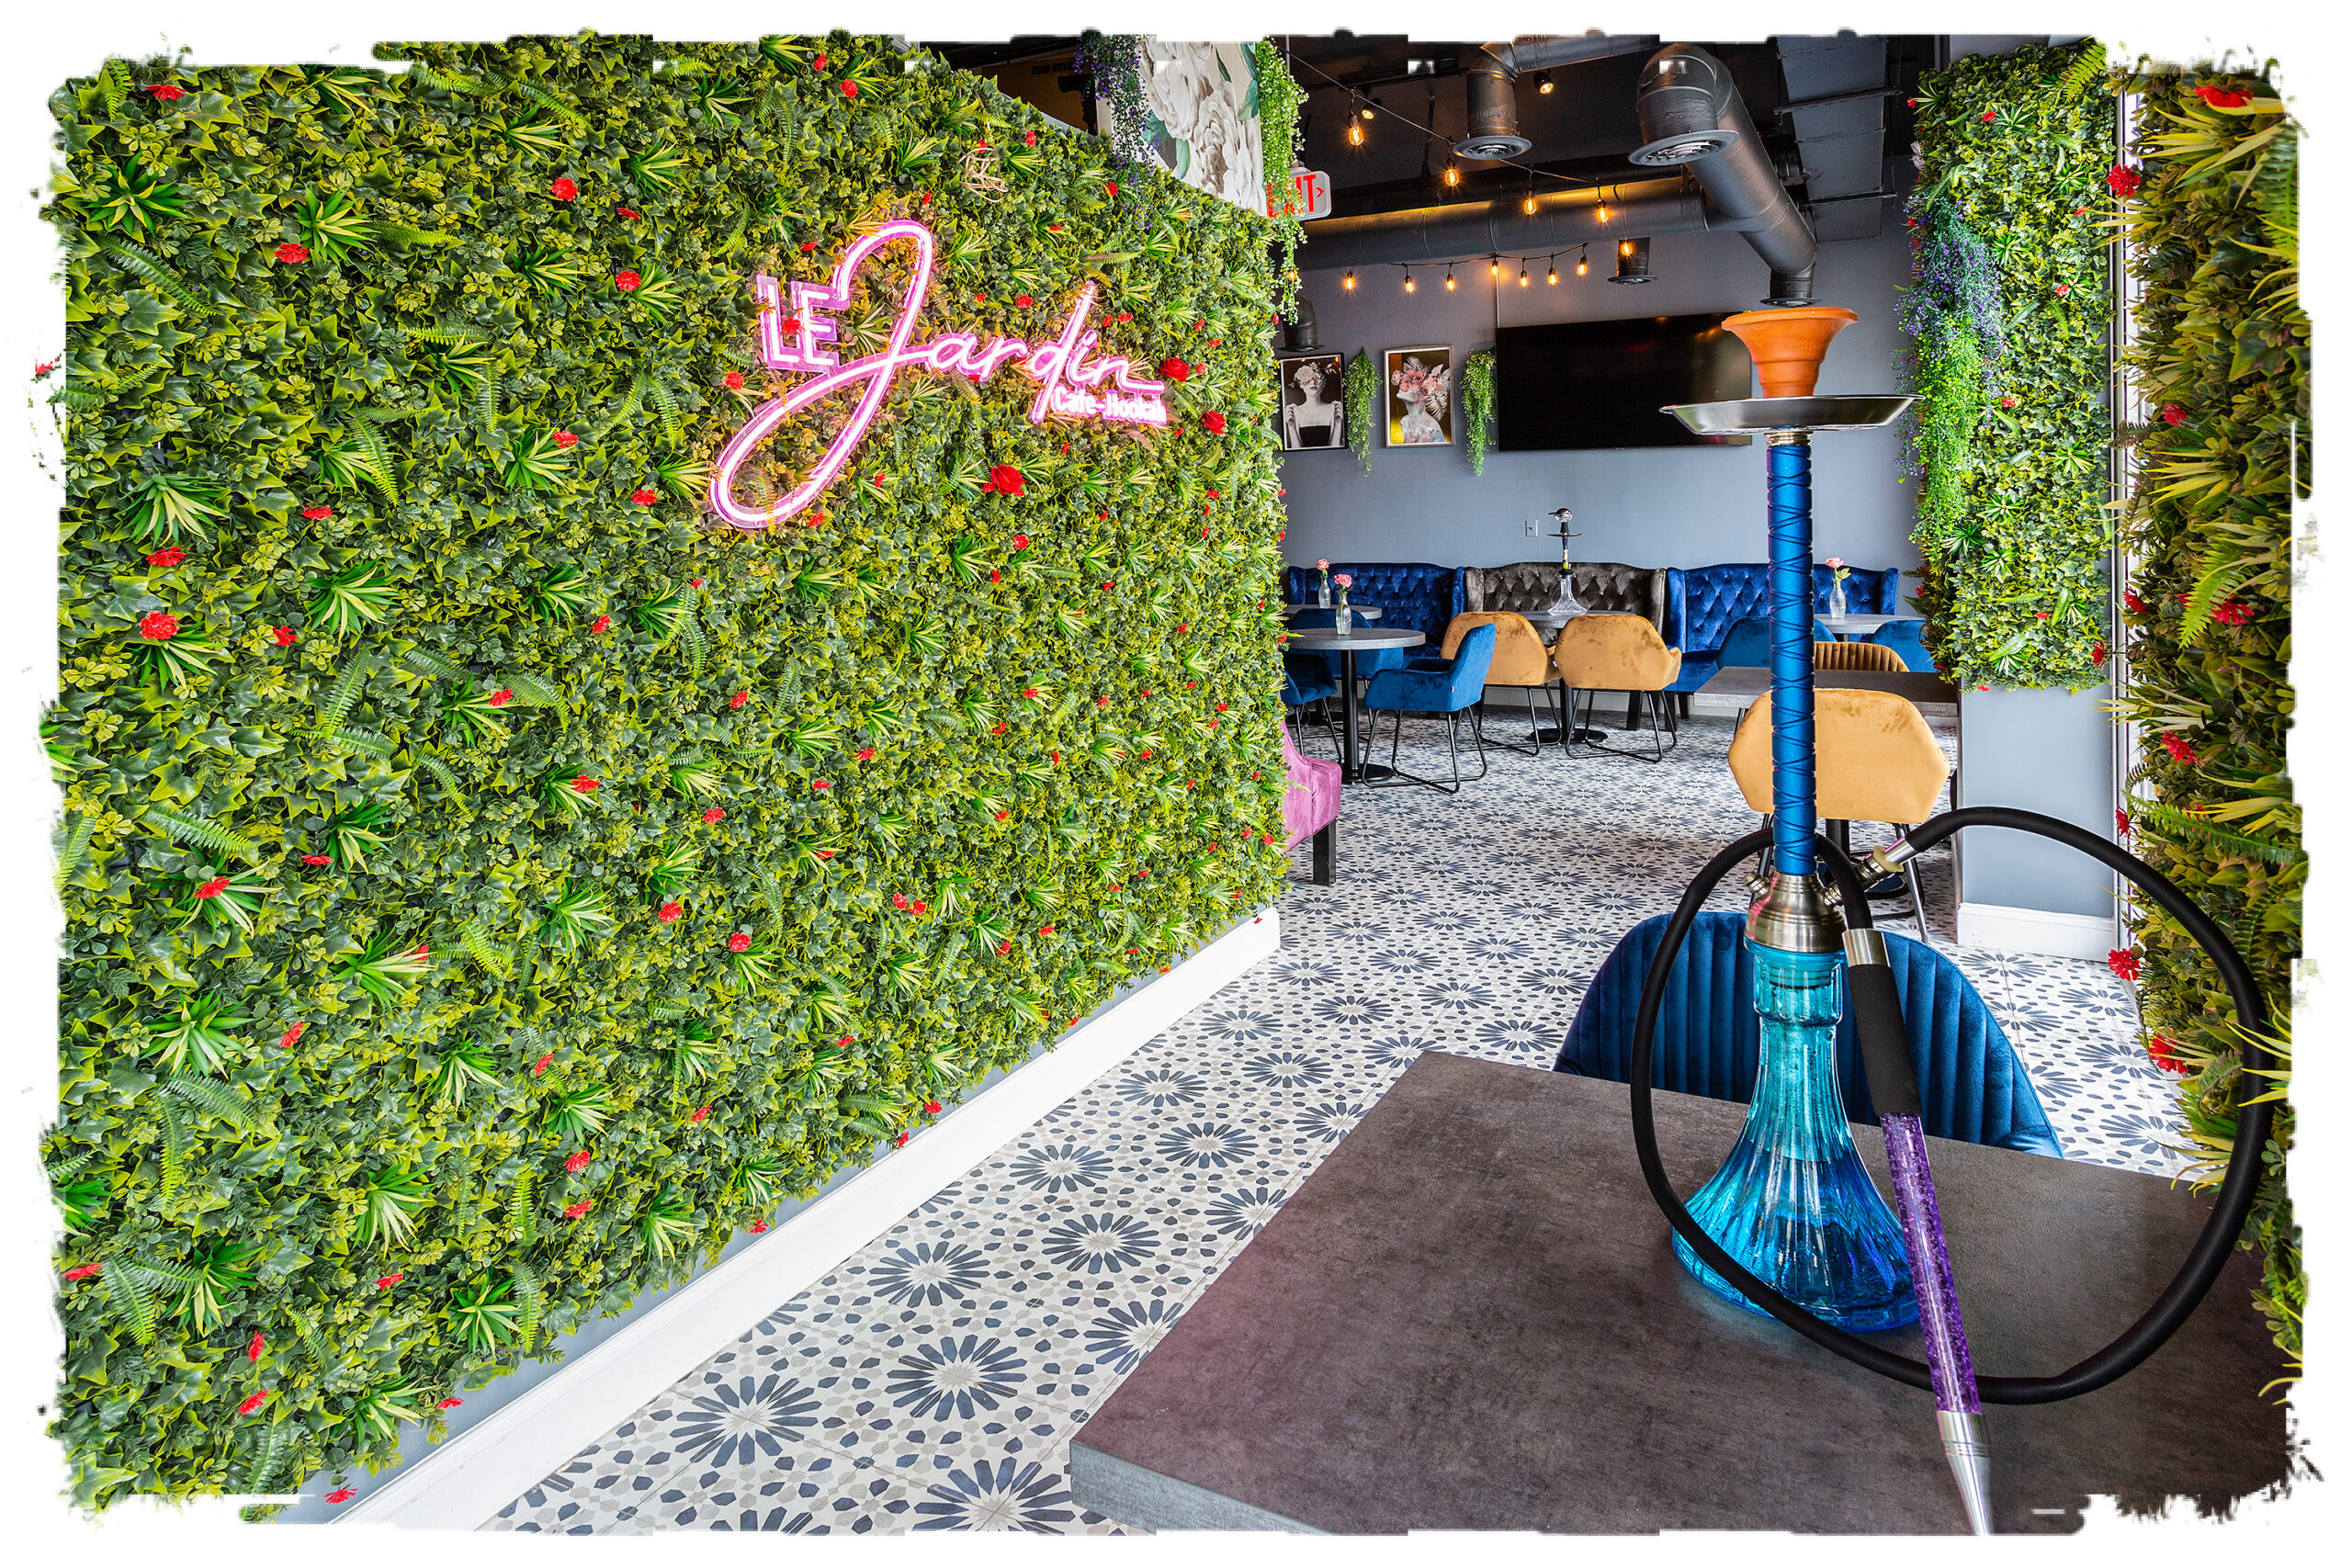 Experience the best of both worlds at Le Jardin Hookah, where we offer a wide range of delicious beverages and sweet treats to enjoy with our premium hookah selection., Hookah lounge in Falls Church VA, SHisha bar and cafe 